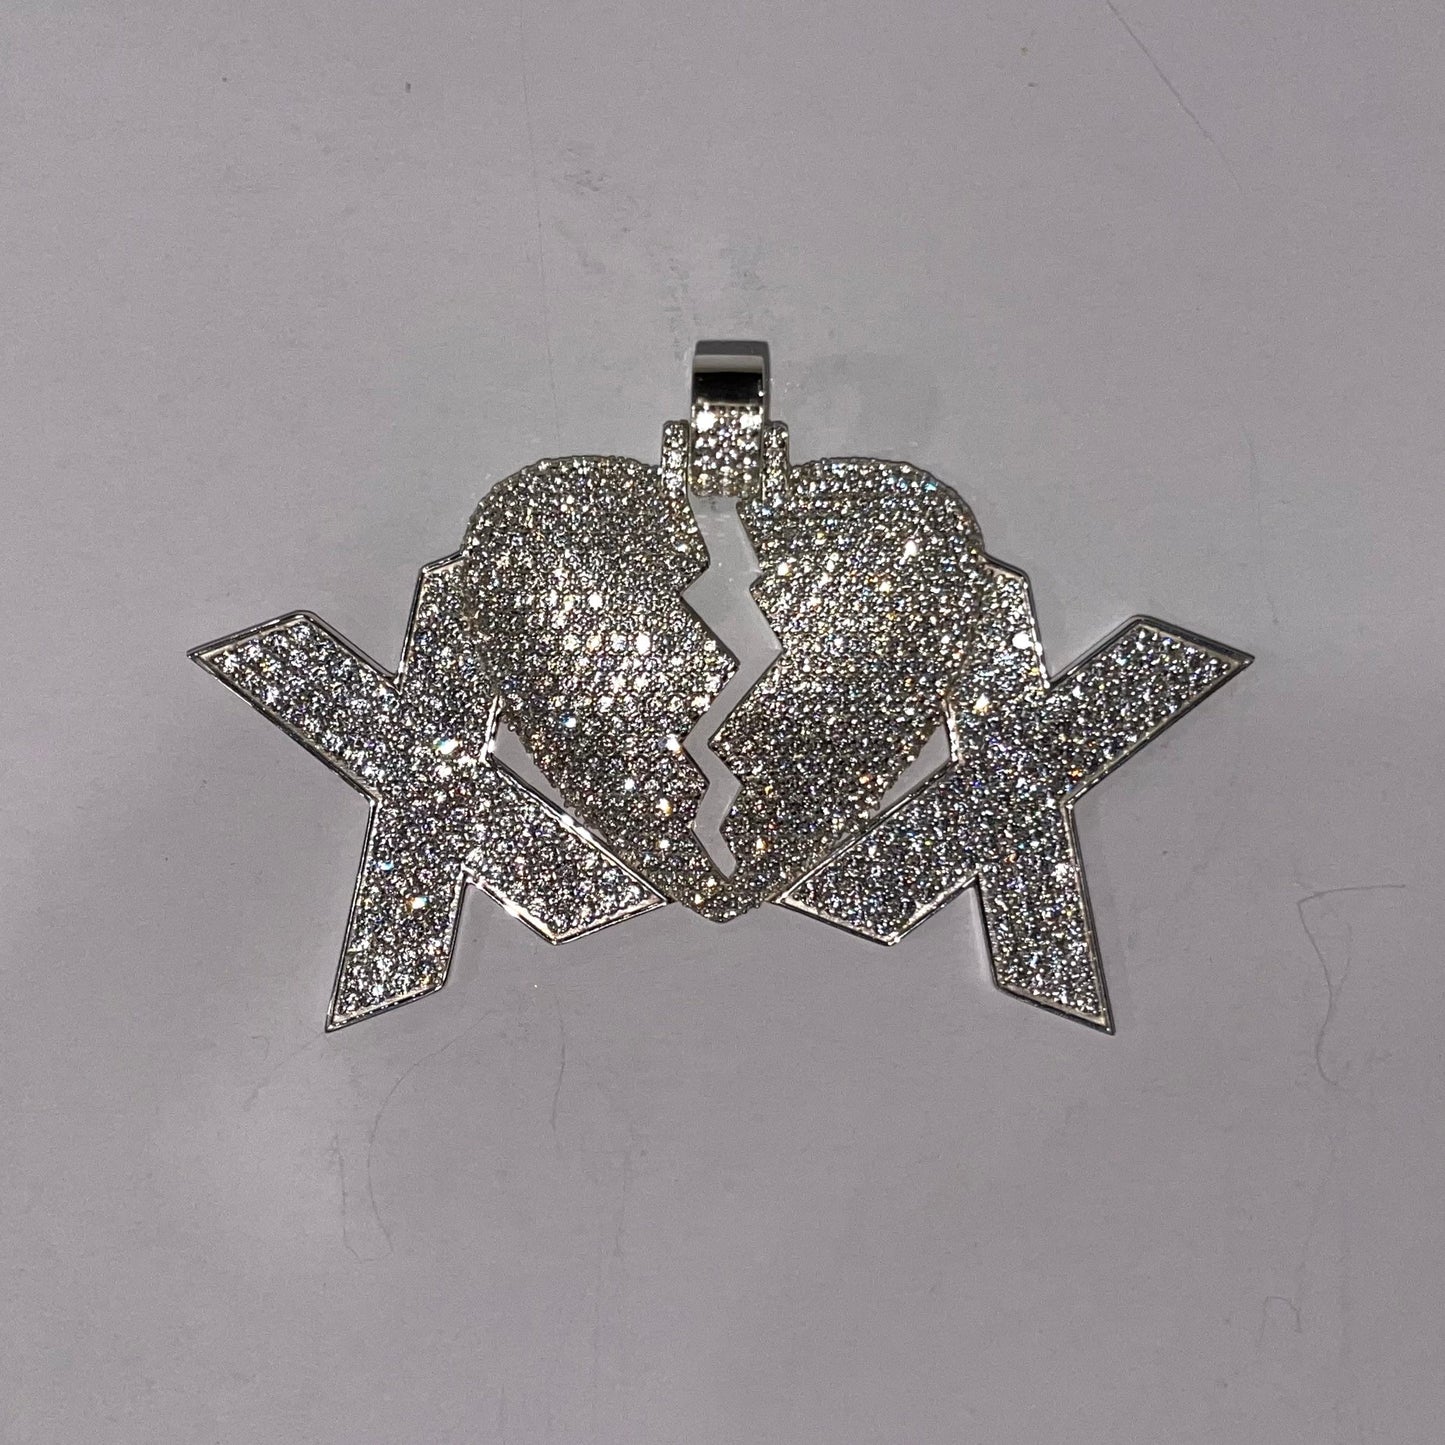 (3 of 3) Custom Made Sterling Silver “Heartbreak” Pendant with CZ